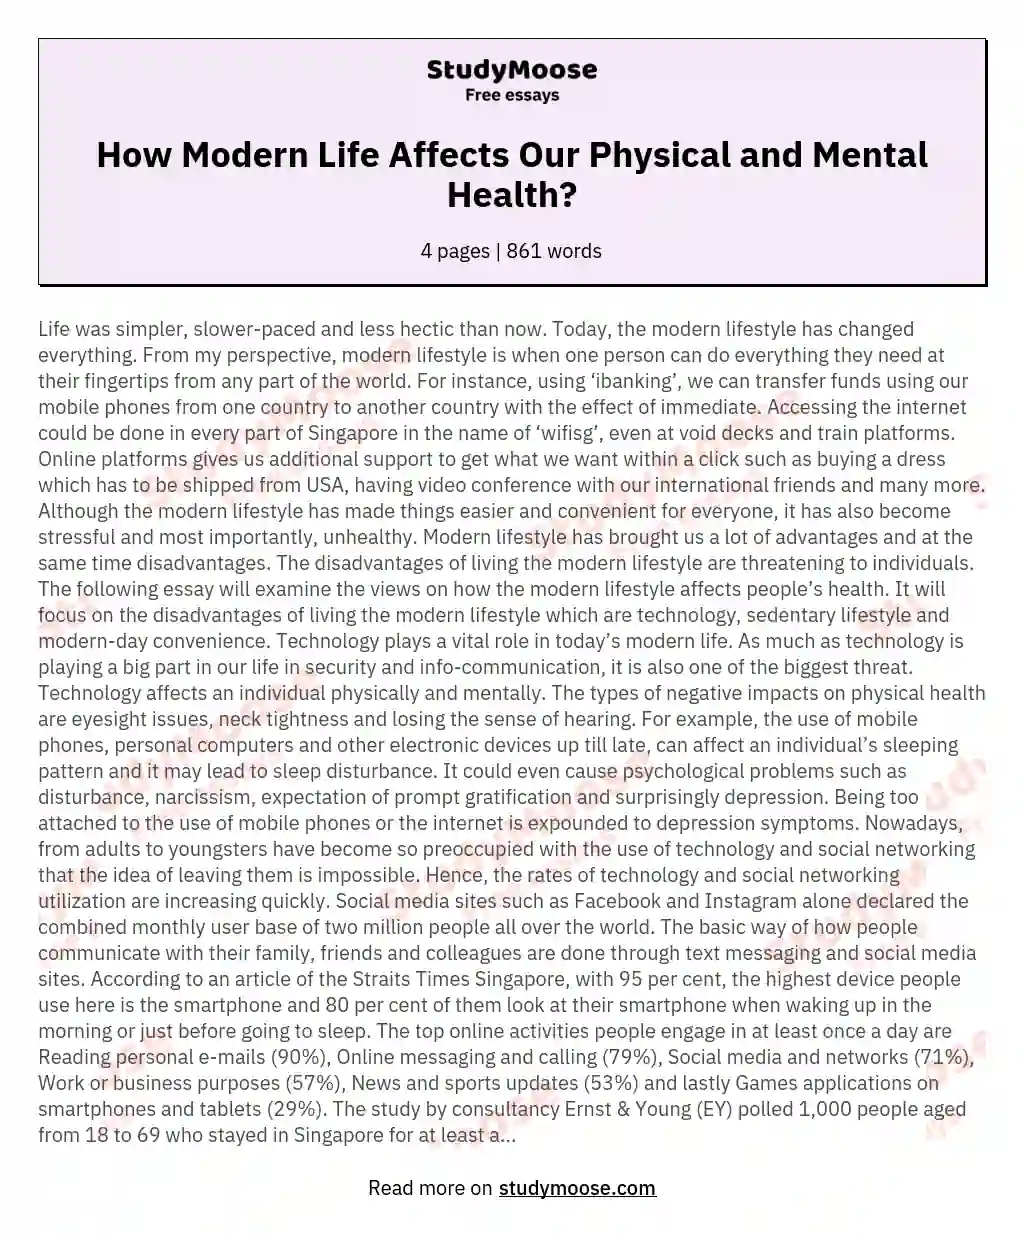 How Modern Life Affects Our Physical and Mental Health?